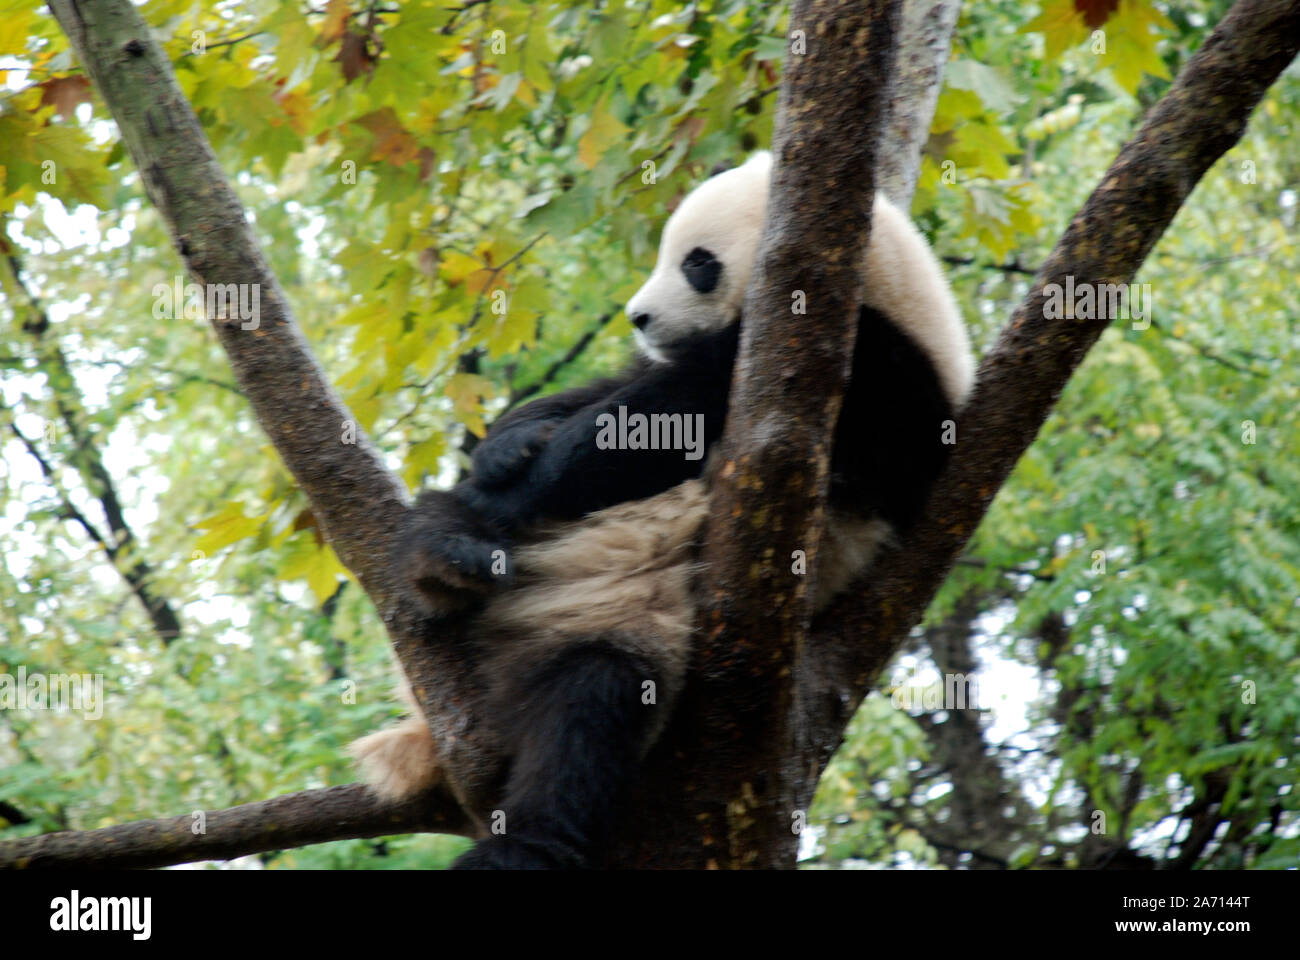 A giant panda rests in a tree at the Chengdu Panda breeding centre in Sichuan Stock Photo